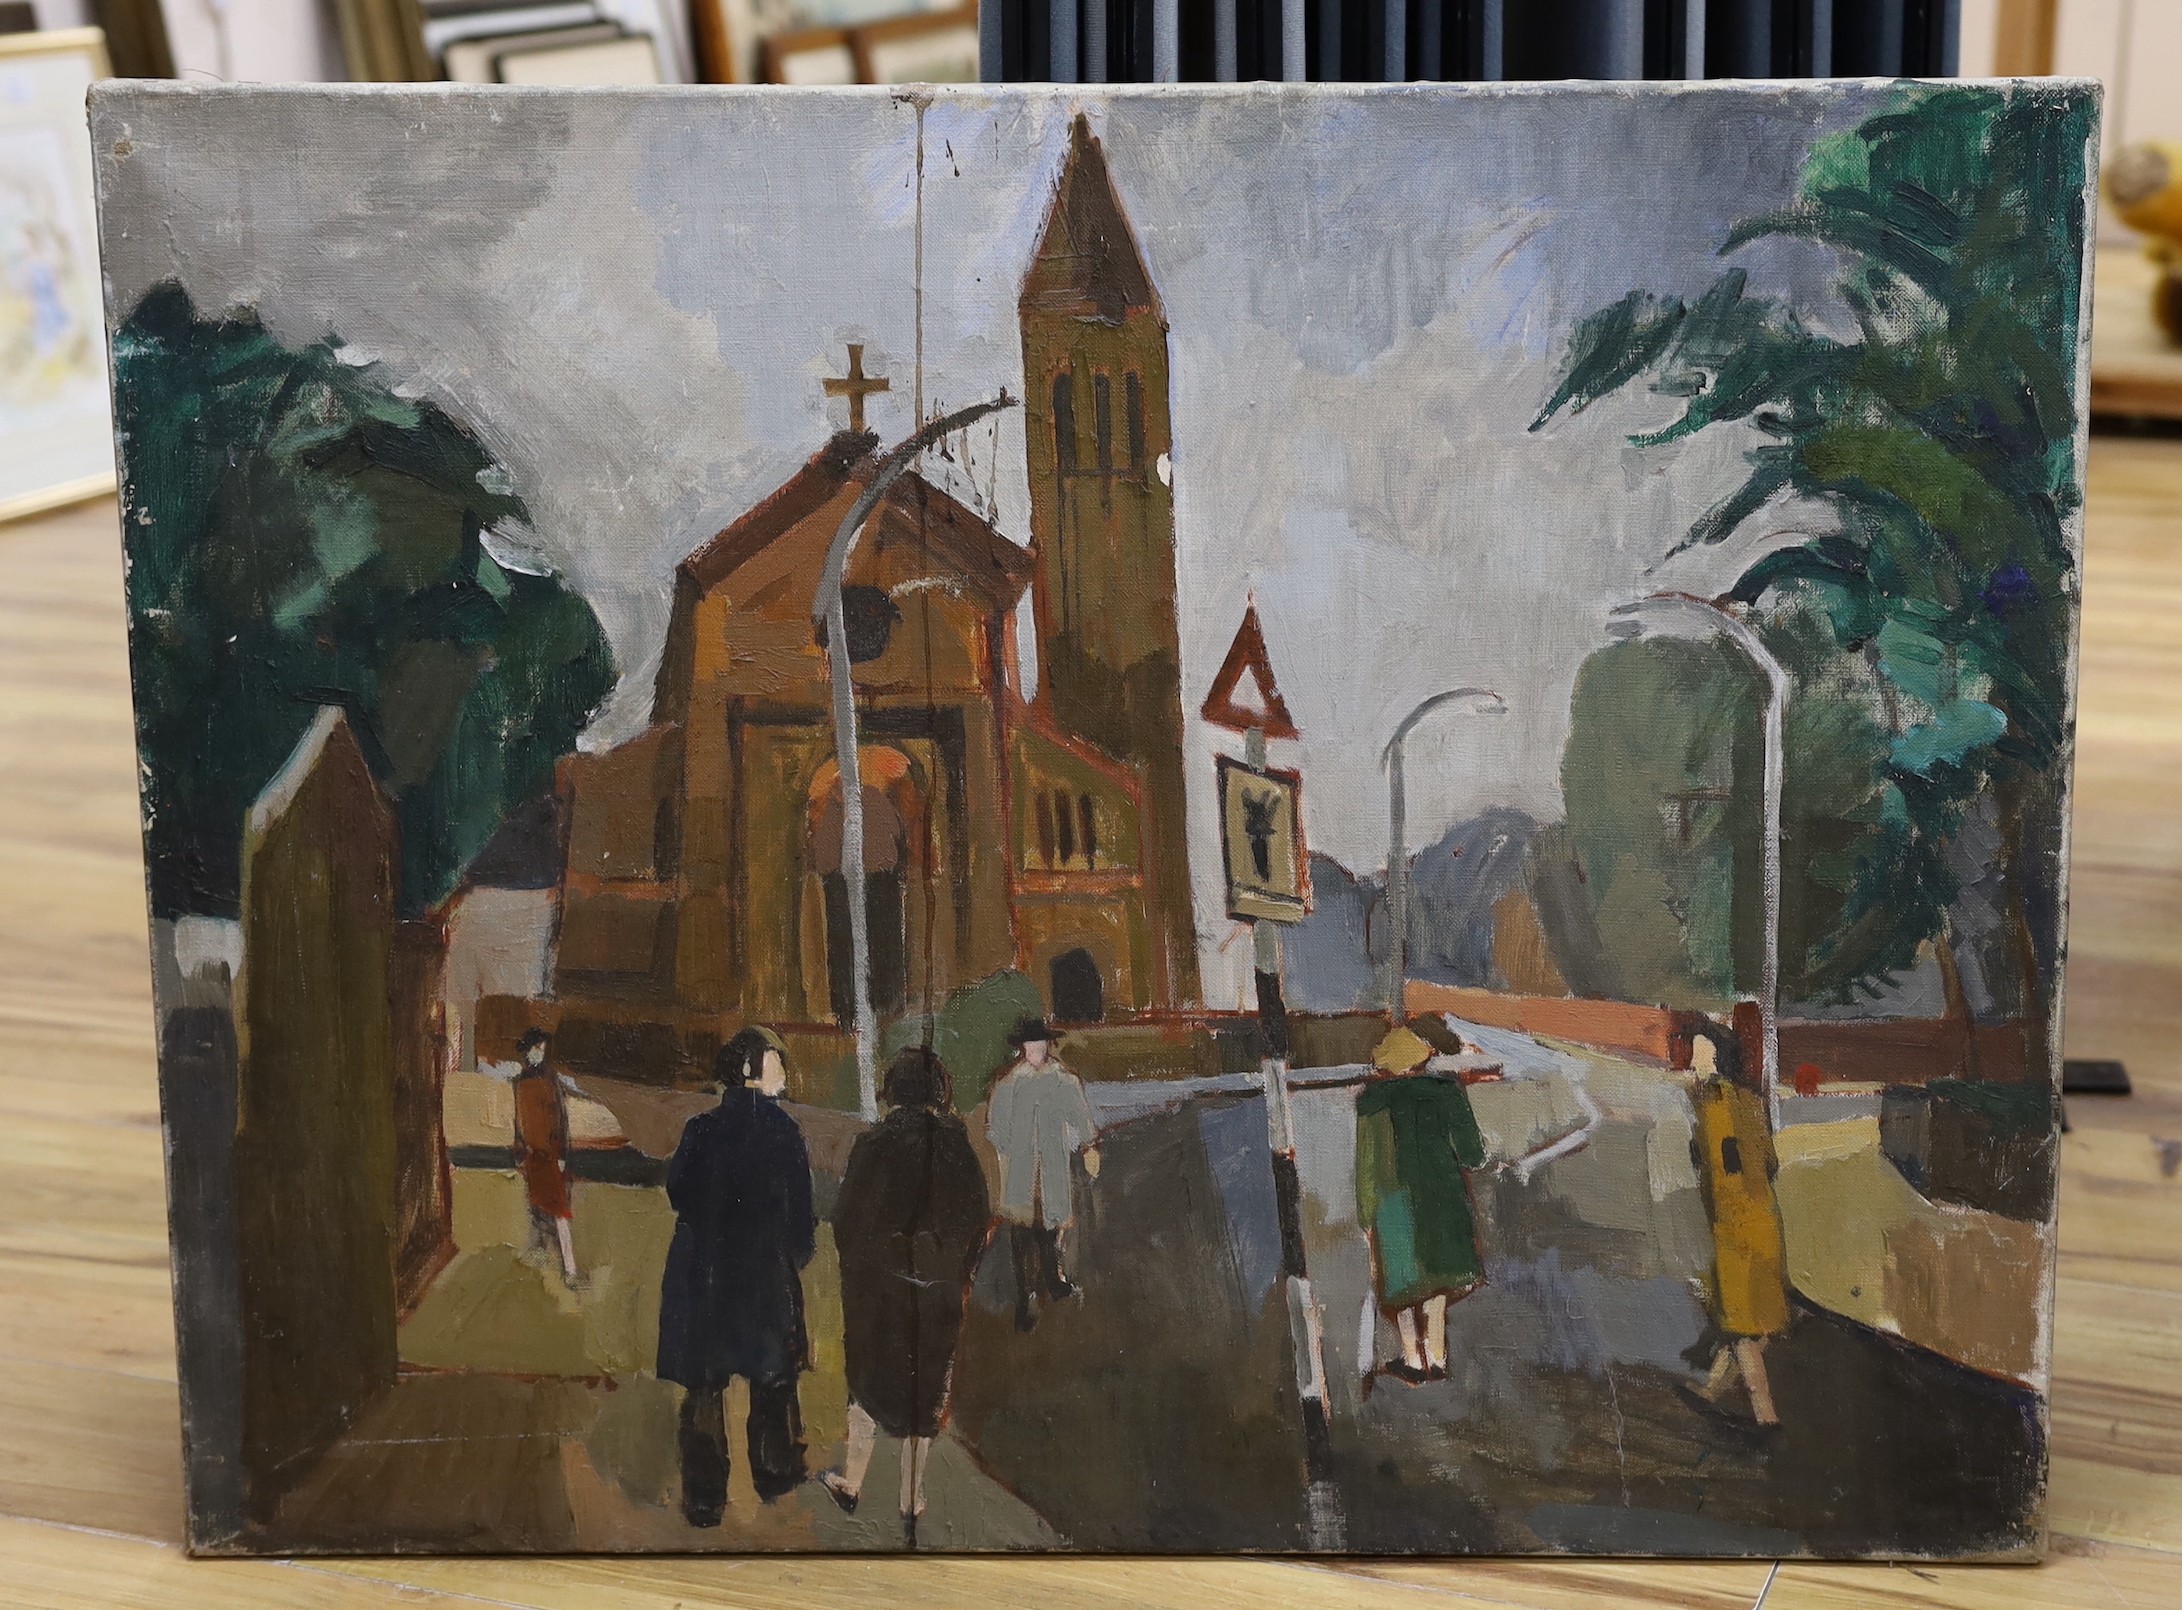 Modern British, oil on canvas, Street scene with figures and church, 70 x 91cm, unframed